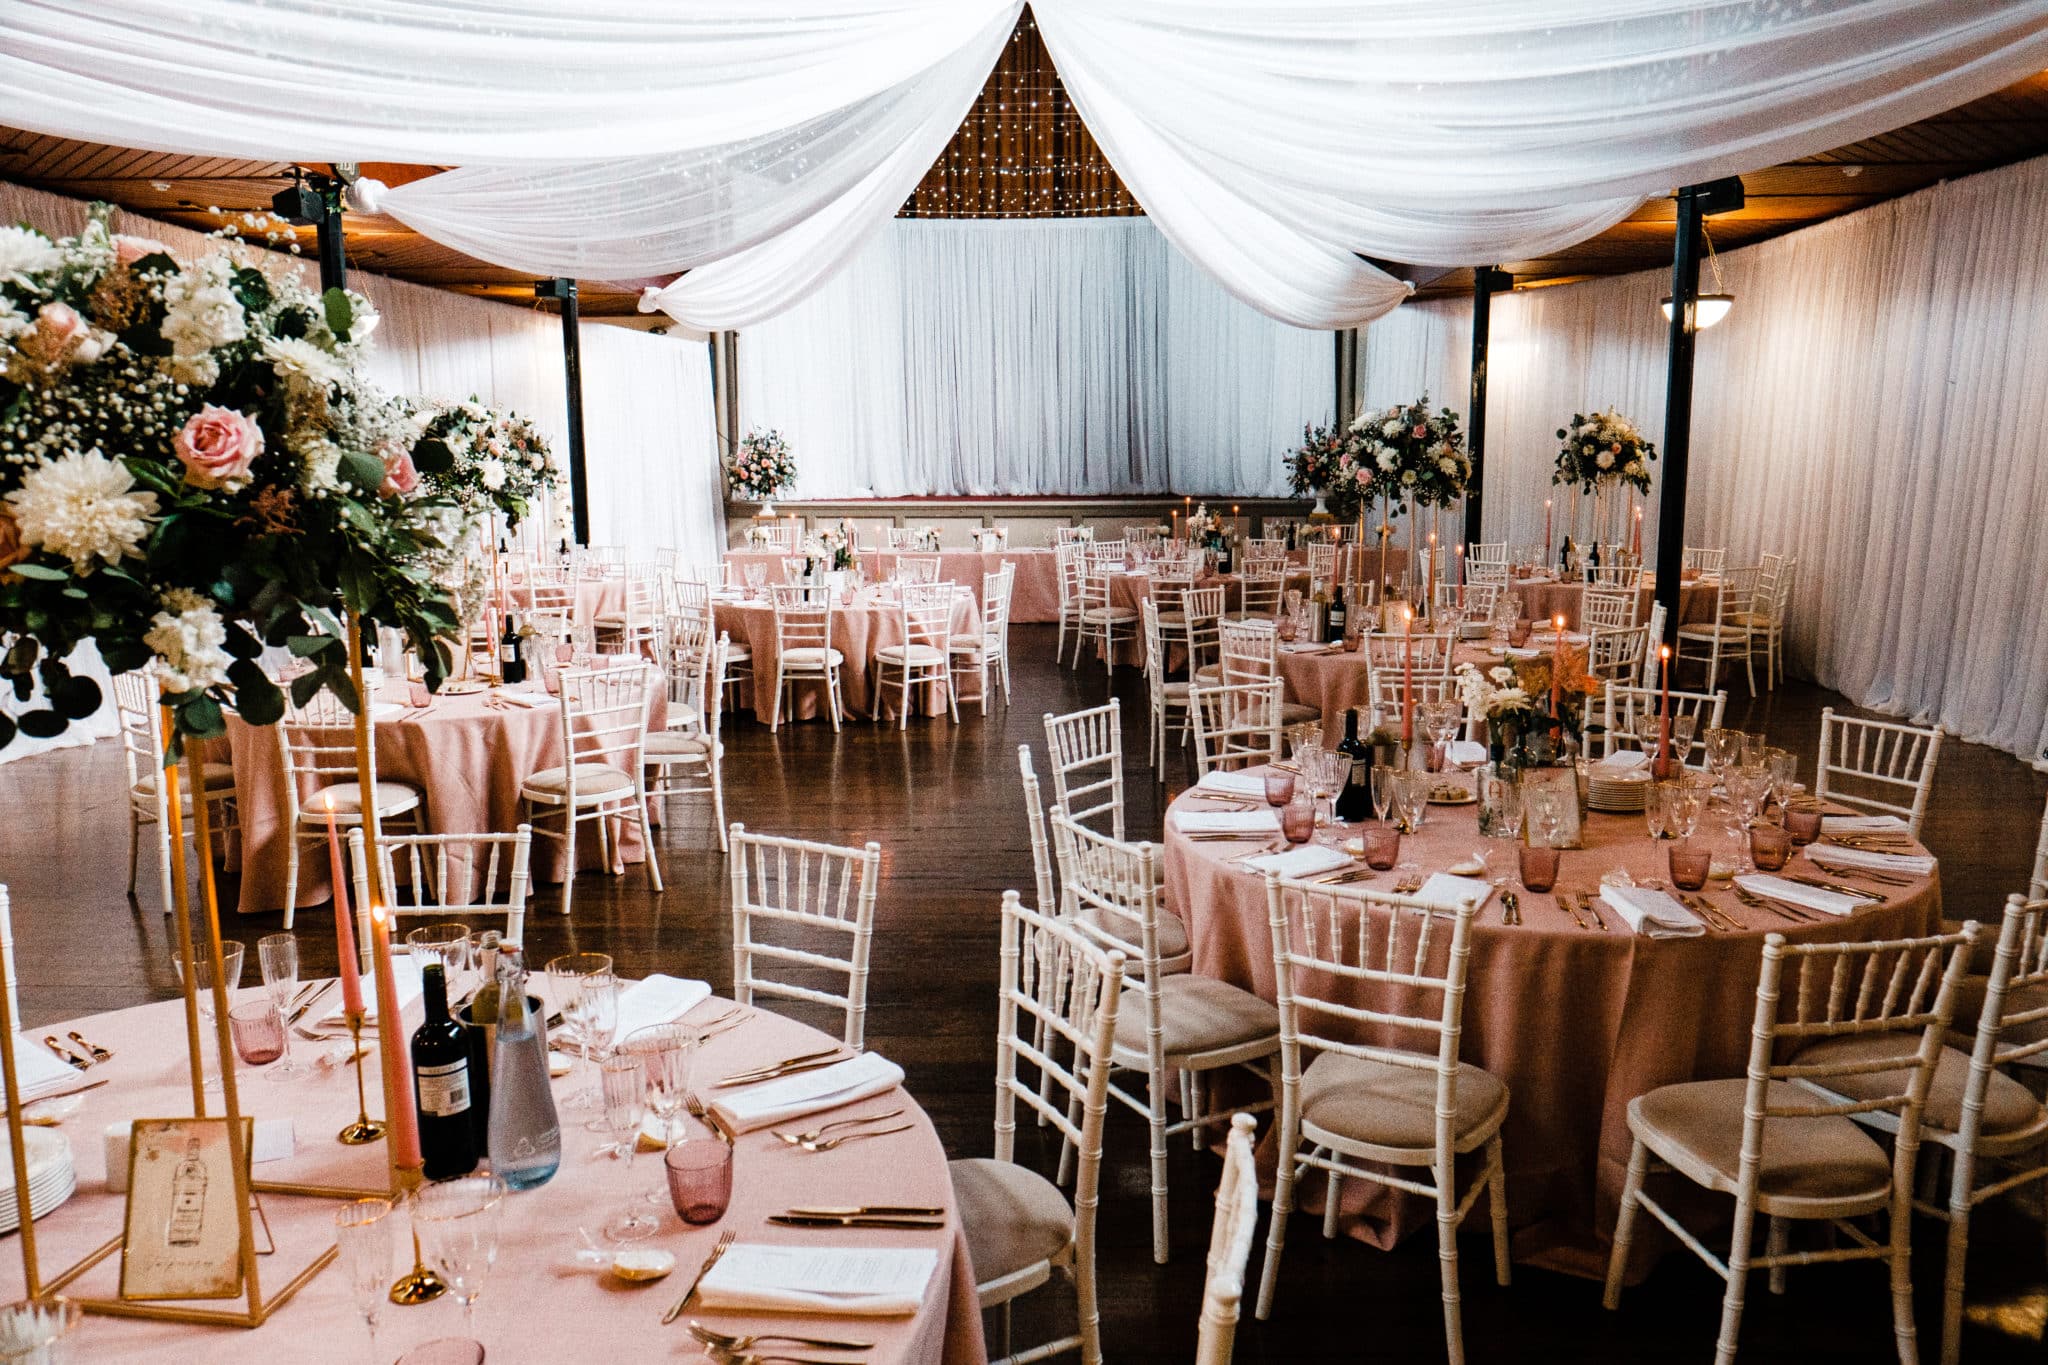 Pink themed wedding reception area with tables, chairs and flower bouquets